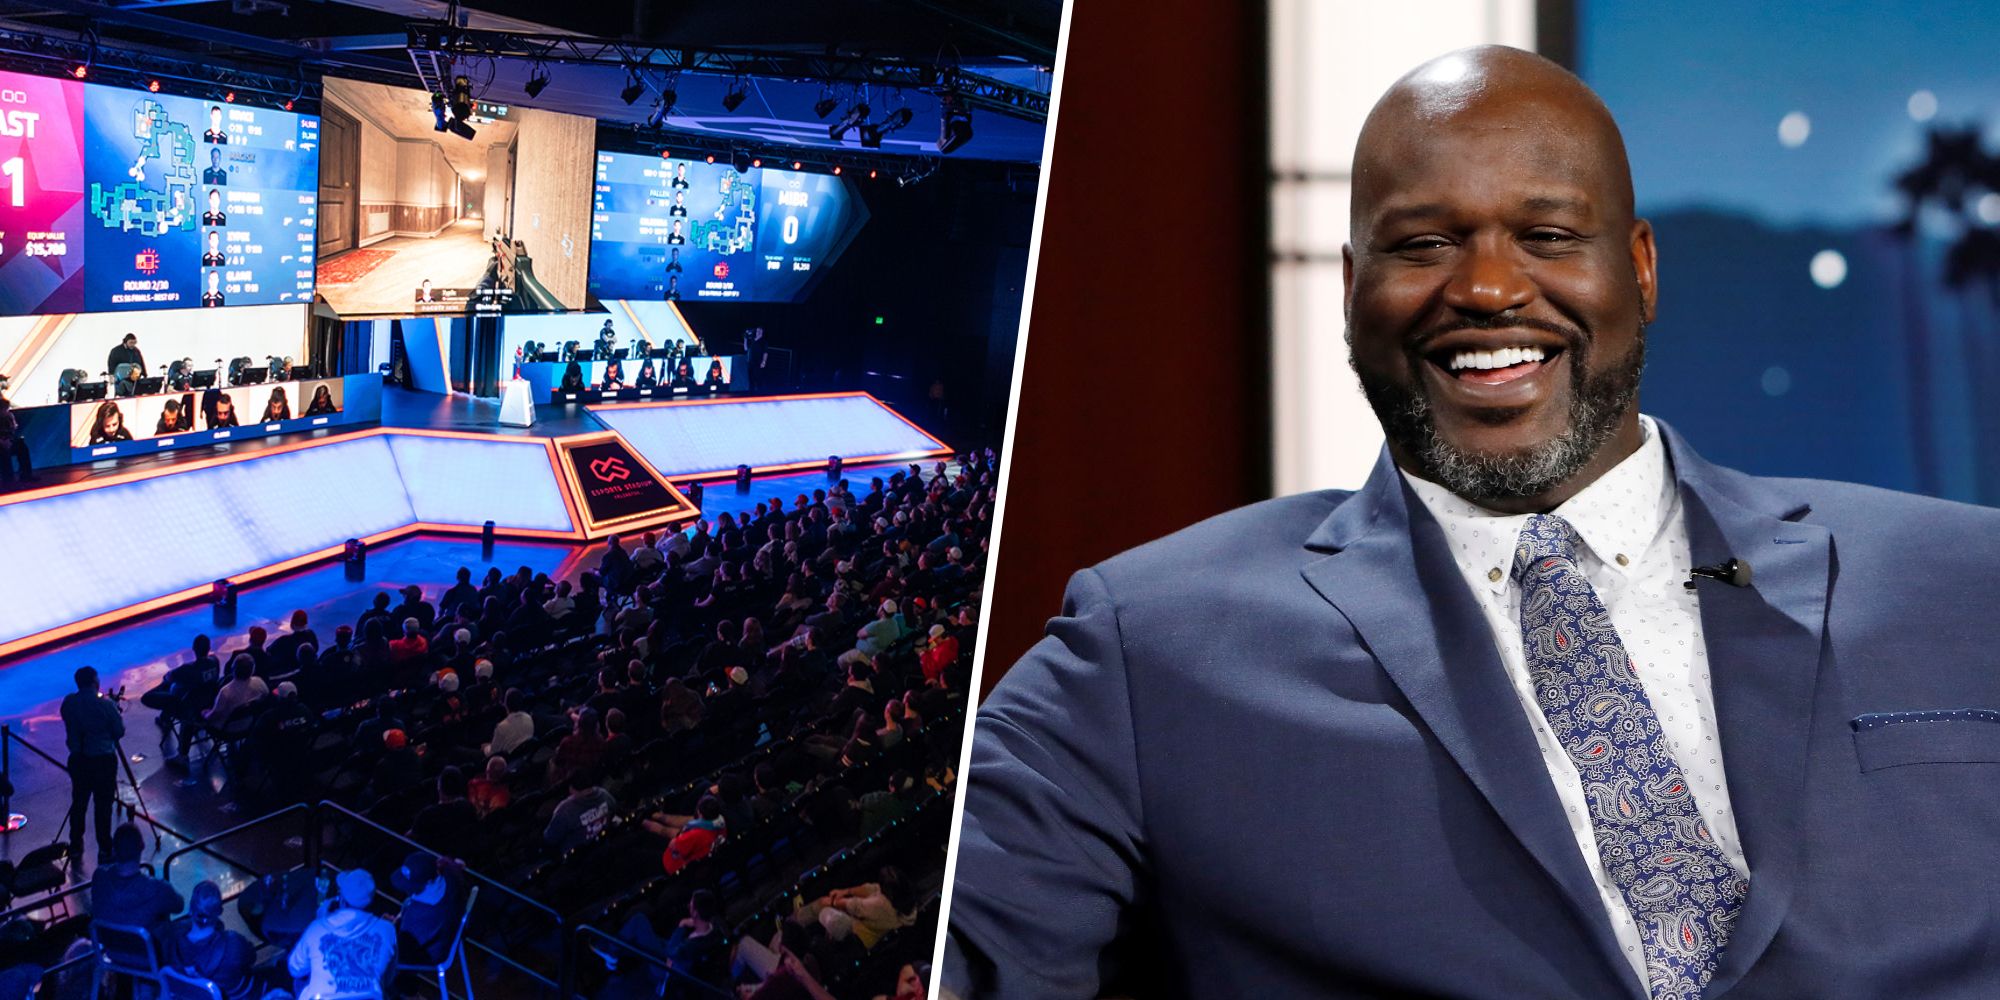 Shaquille O'Neal next to an Esports arena